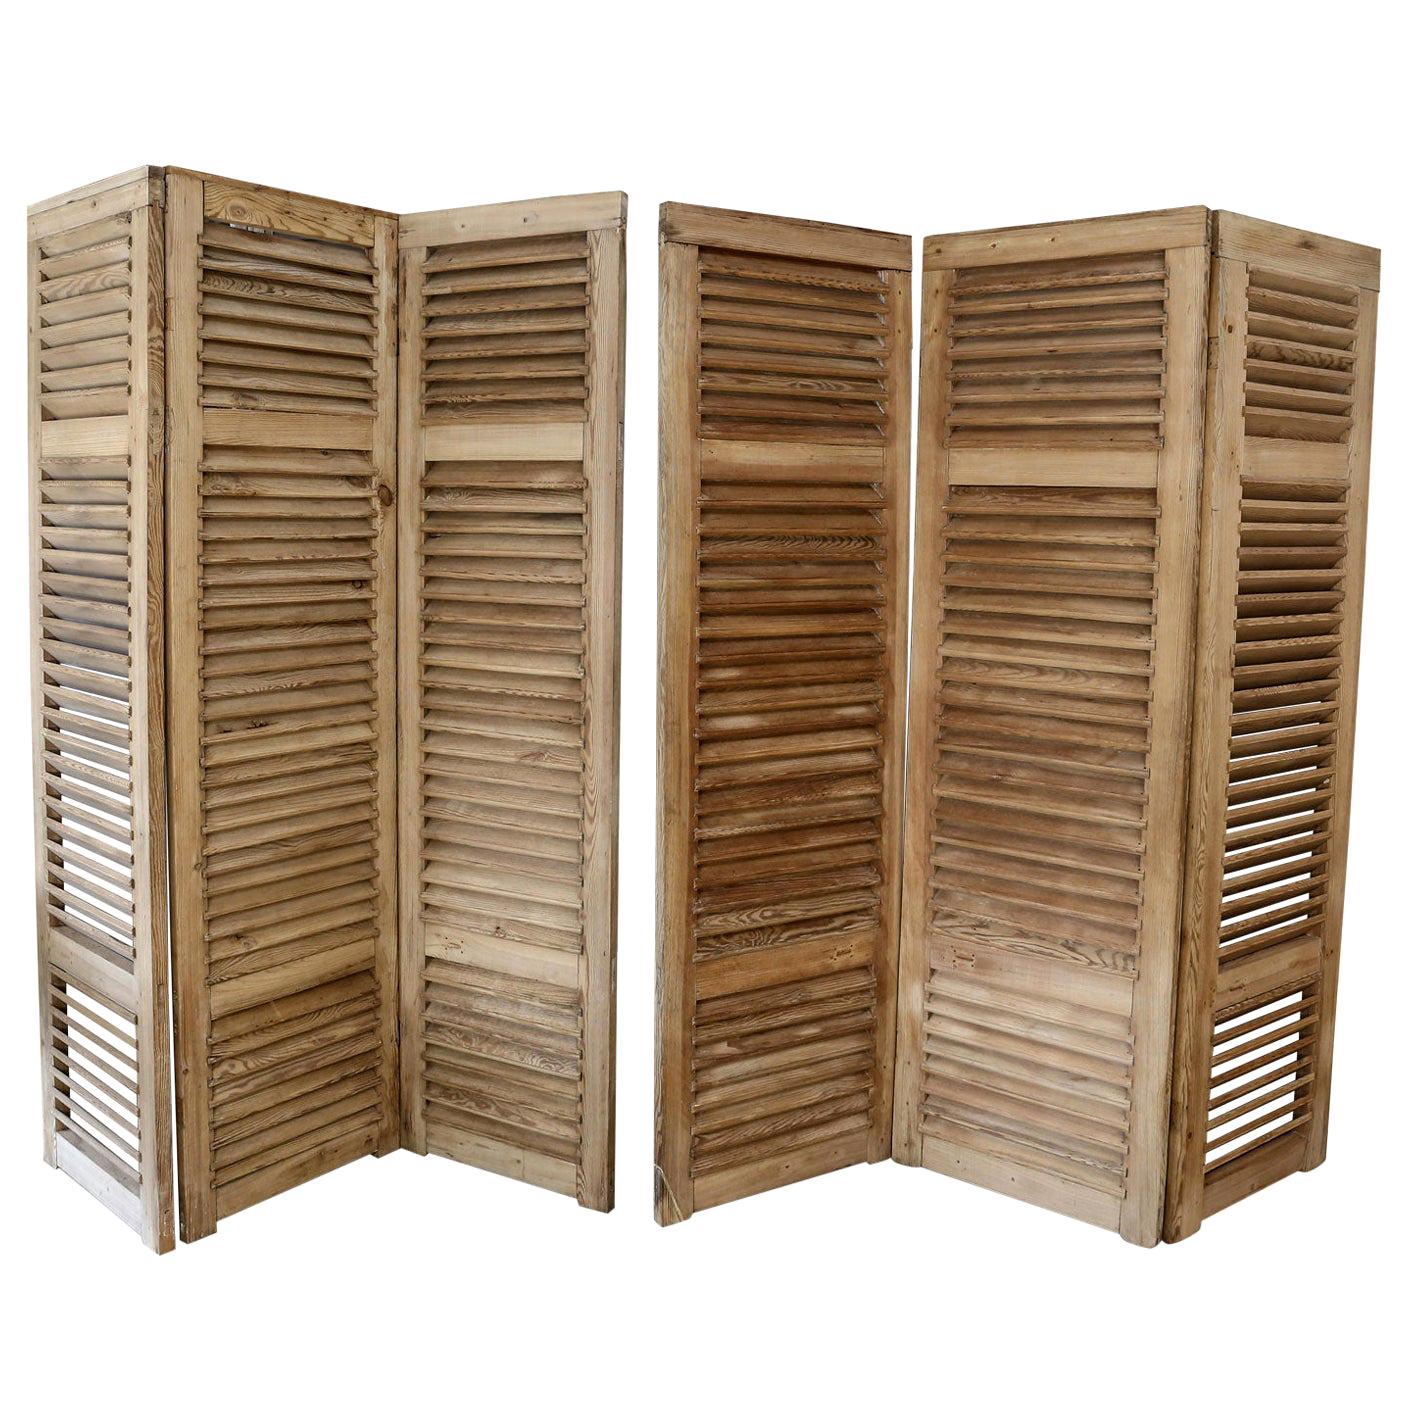 Set of Six Vintage French Shutters